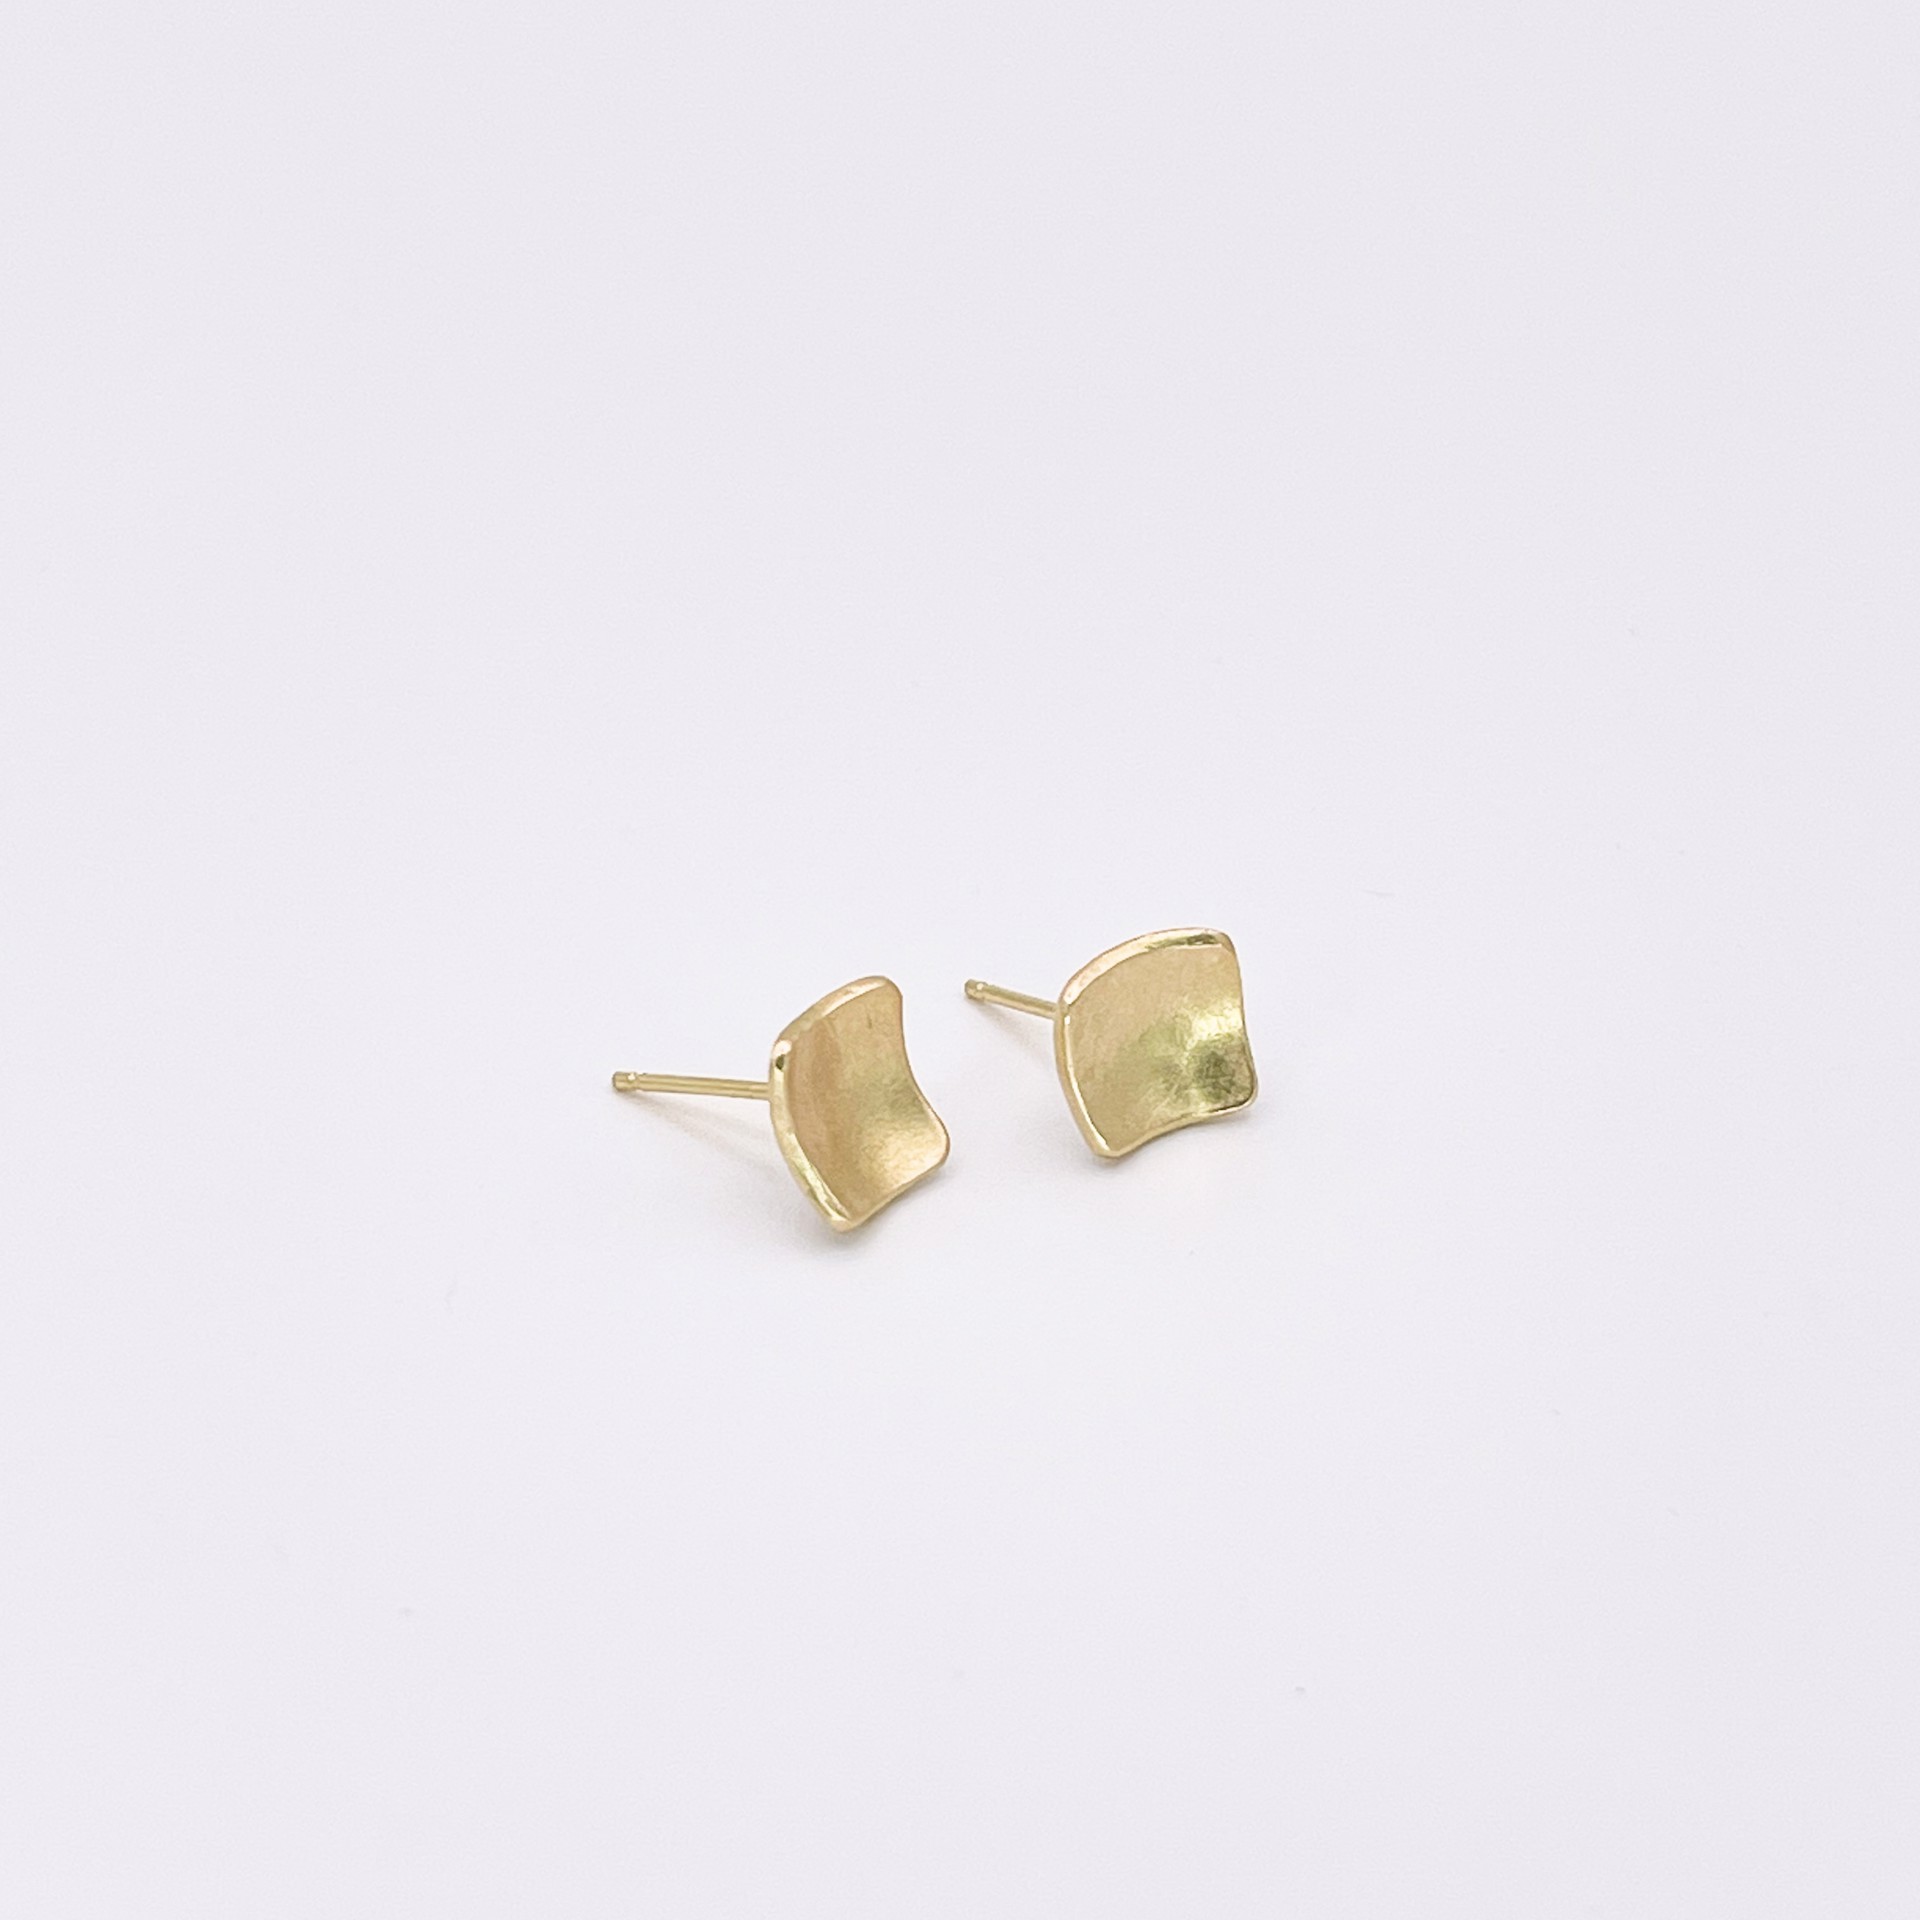 LHE06- concave square posts 18k gold by Leandra Hill